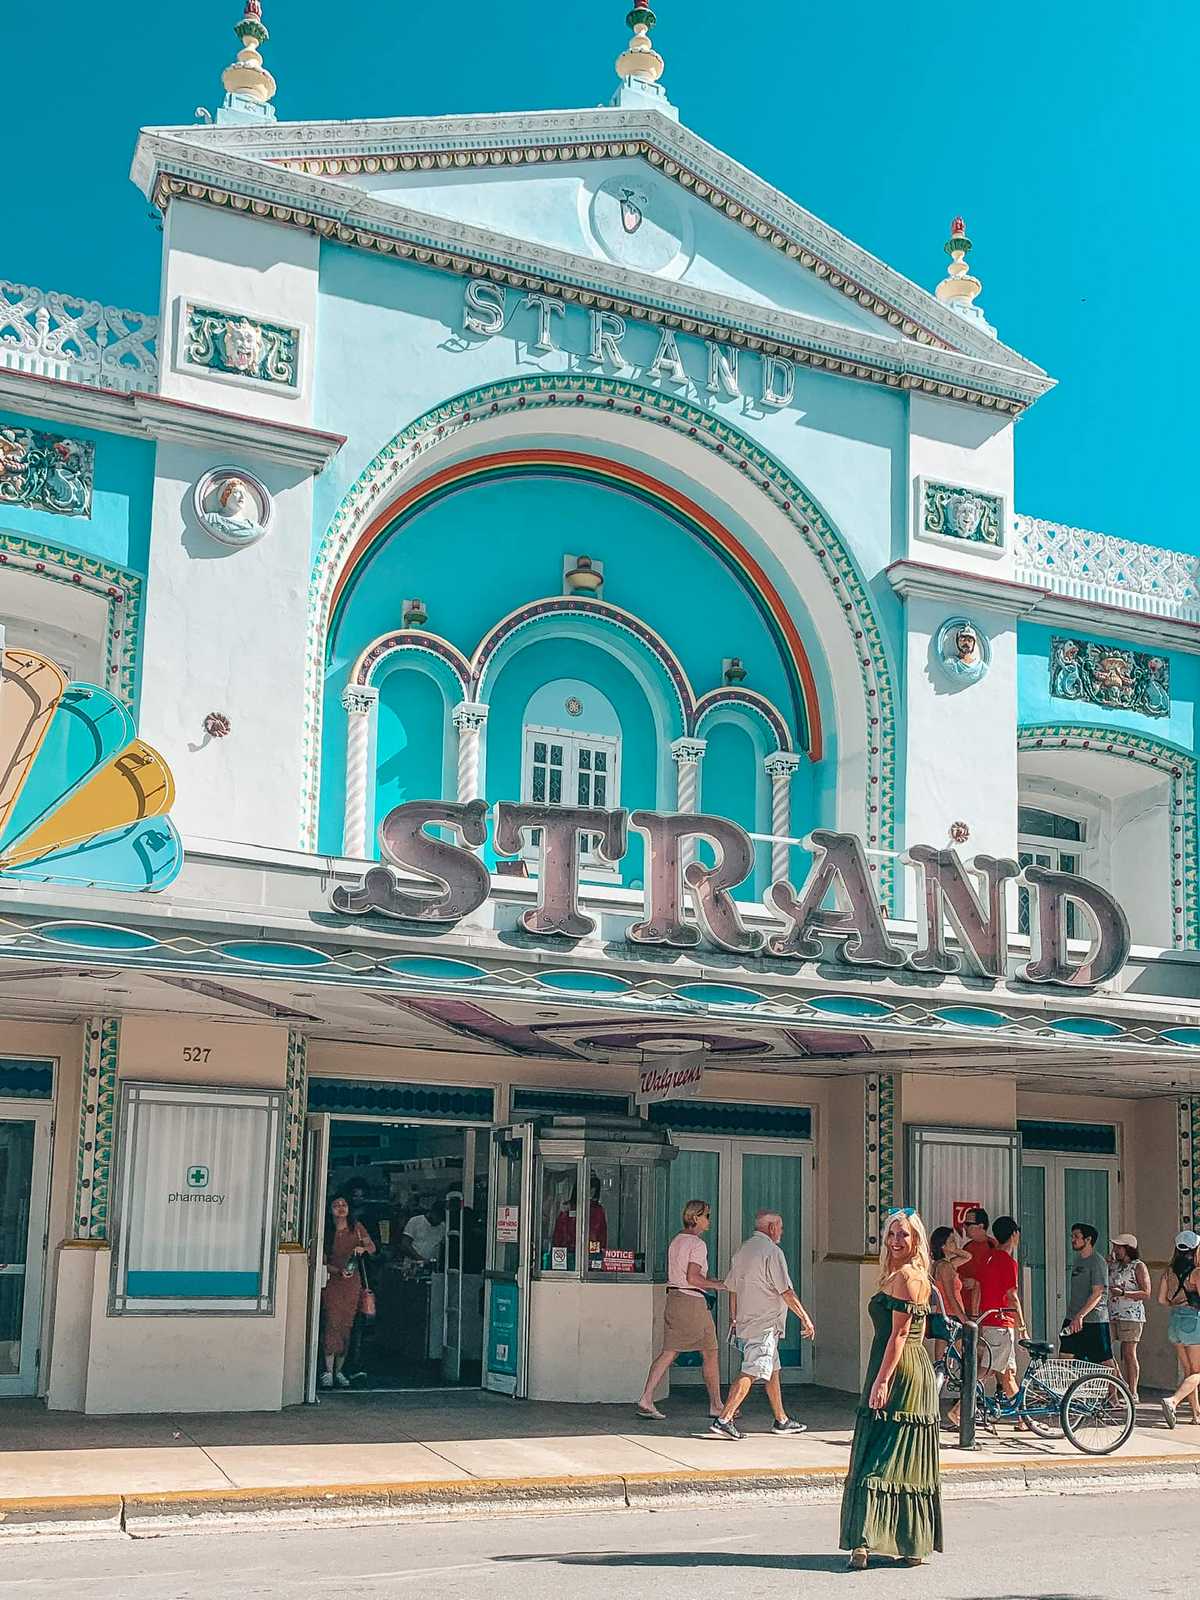 Strand theatre in Key West